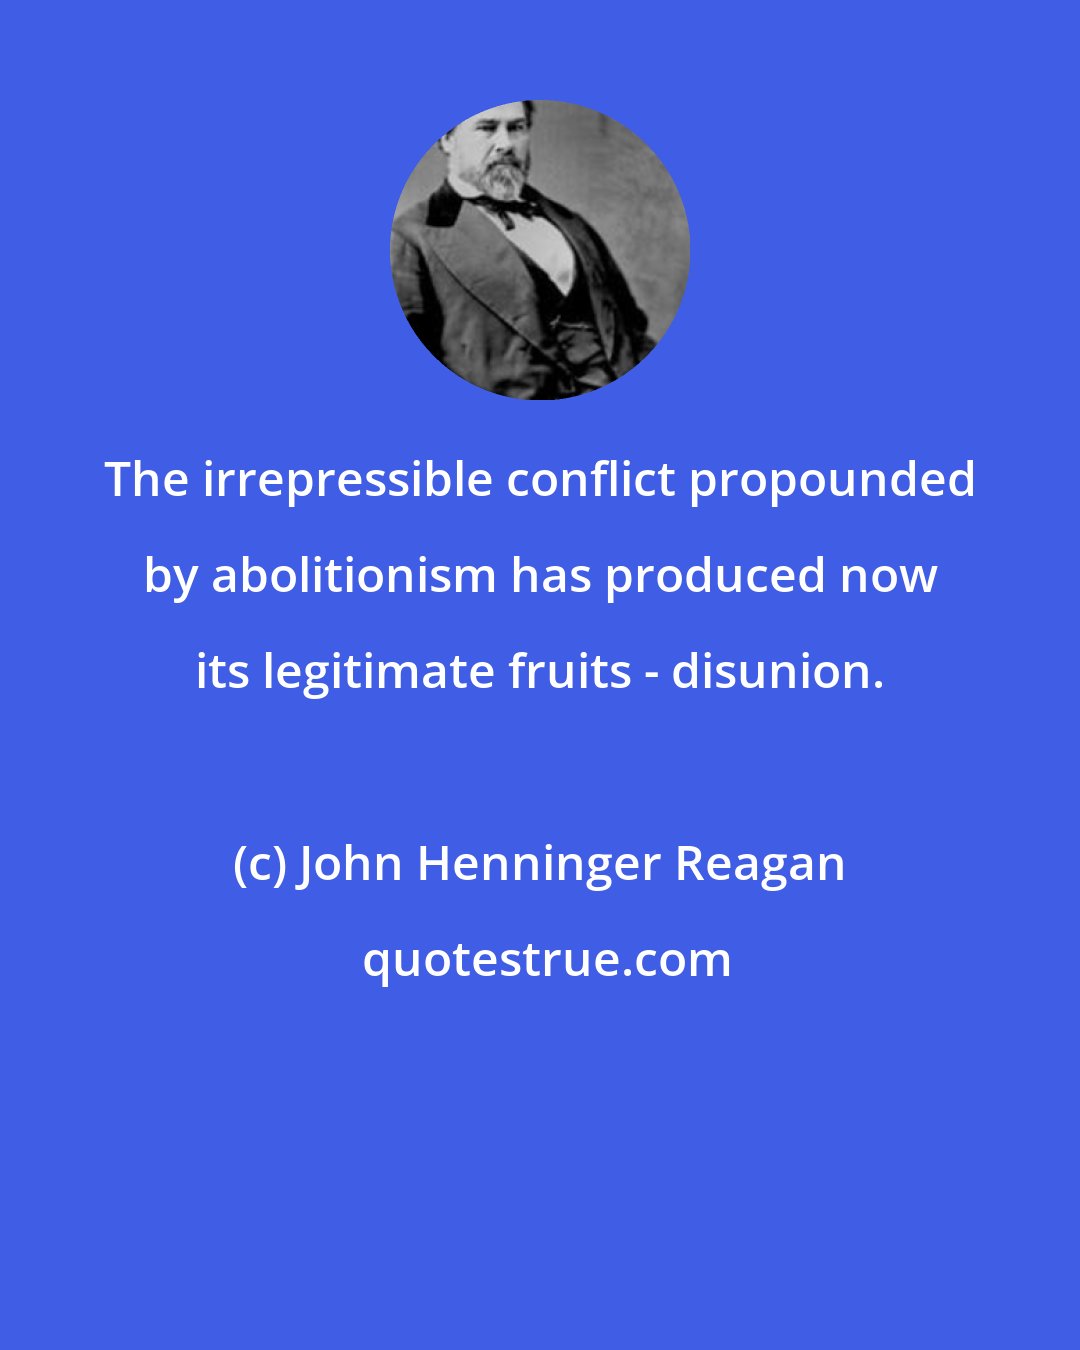 John Henninger Reagan: The irrepressible conflict propounded by abolitionism has produced now its legitimate fruits - disunion.